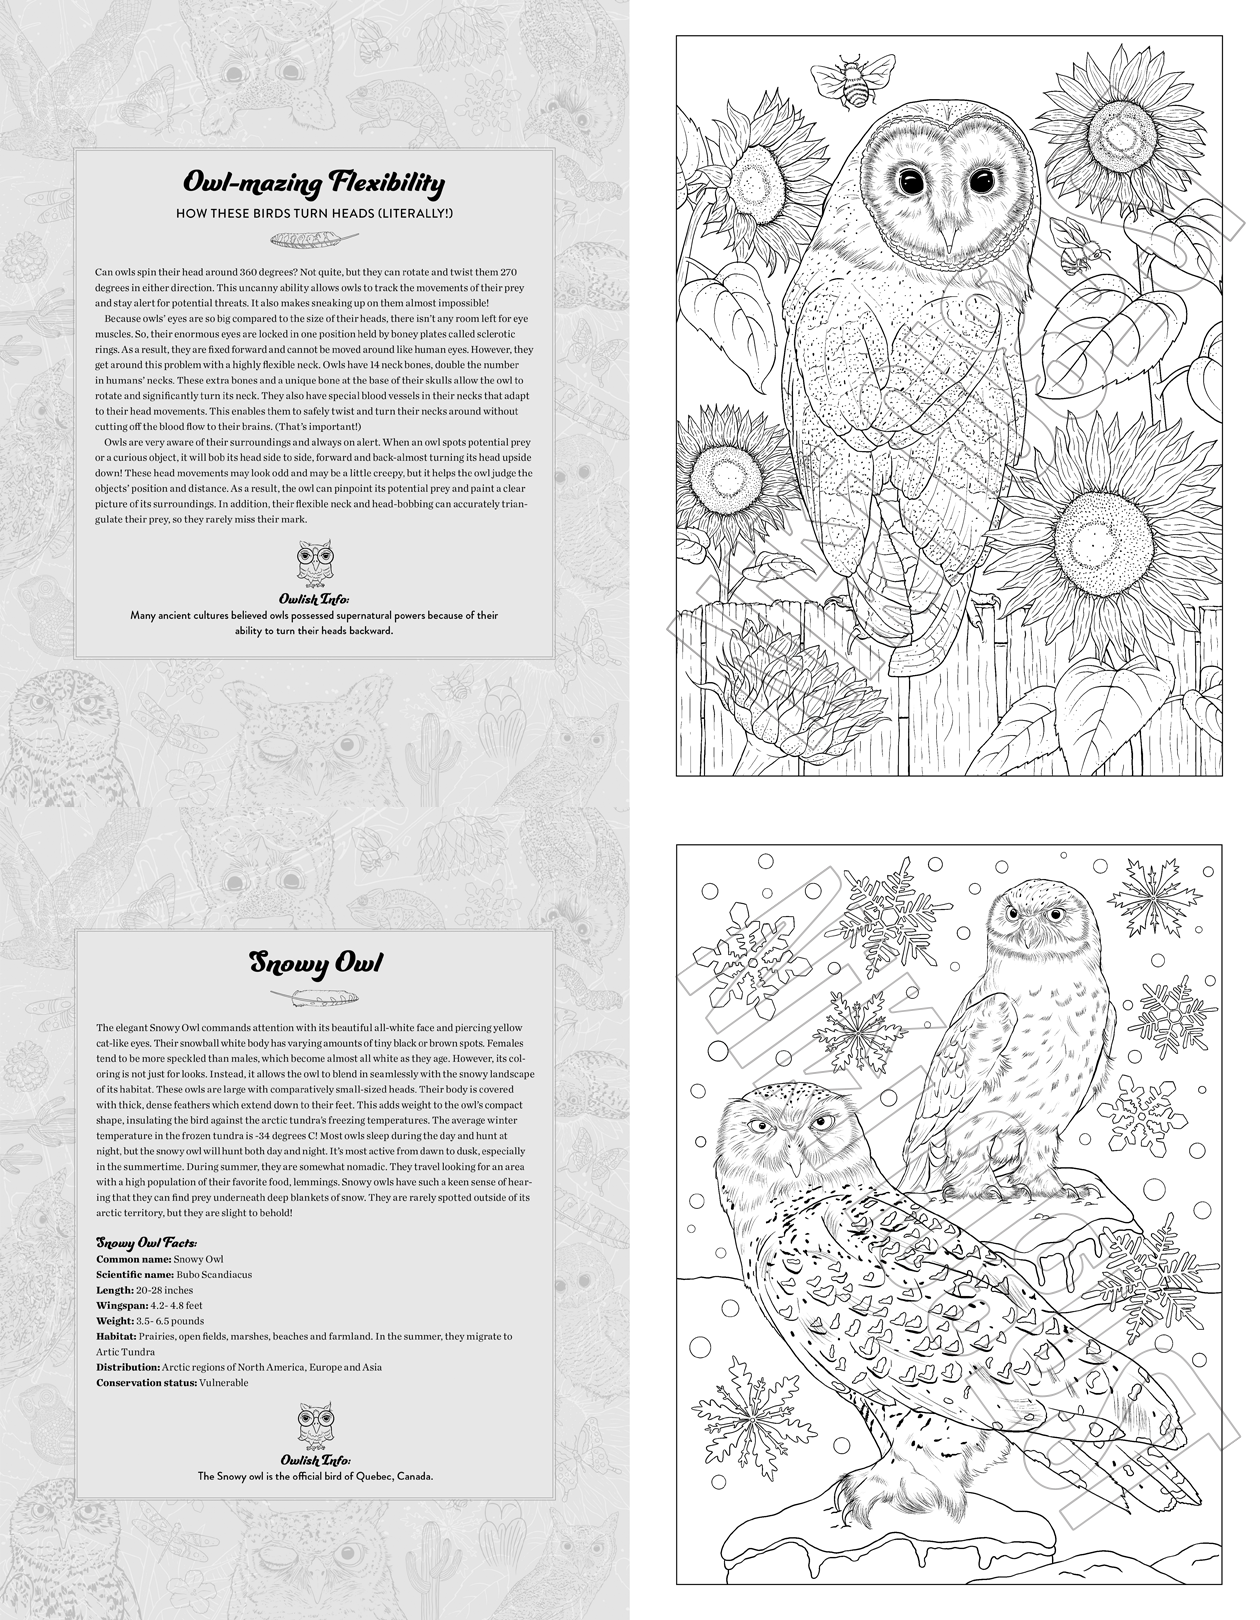 Whoo's Who in the Night Sky, An Owl Coloring Book